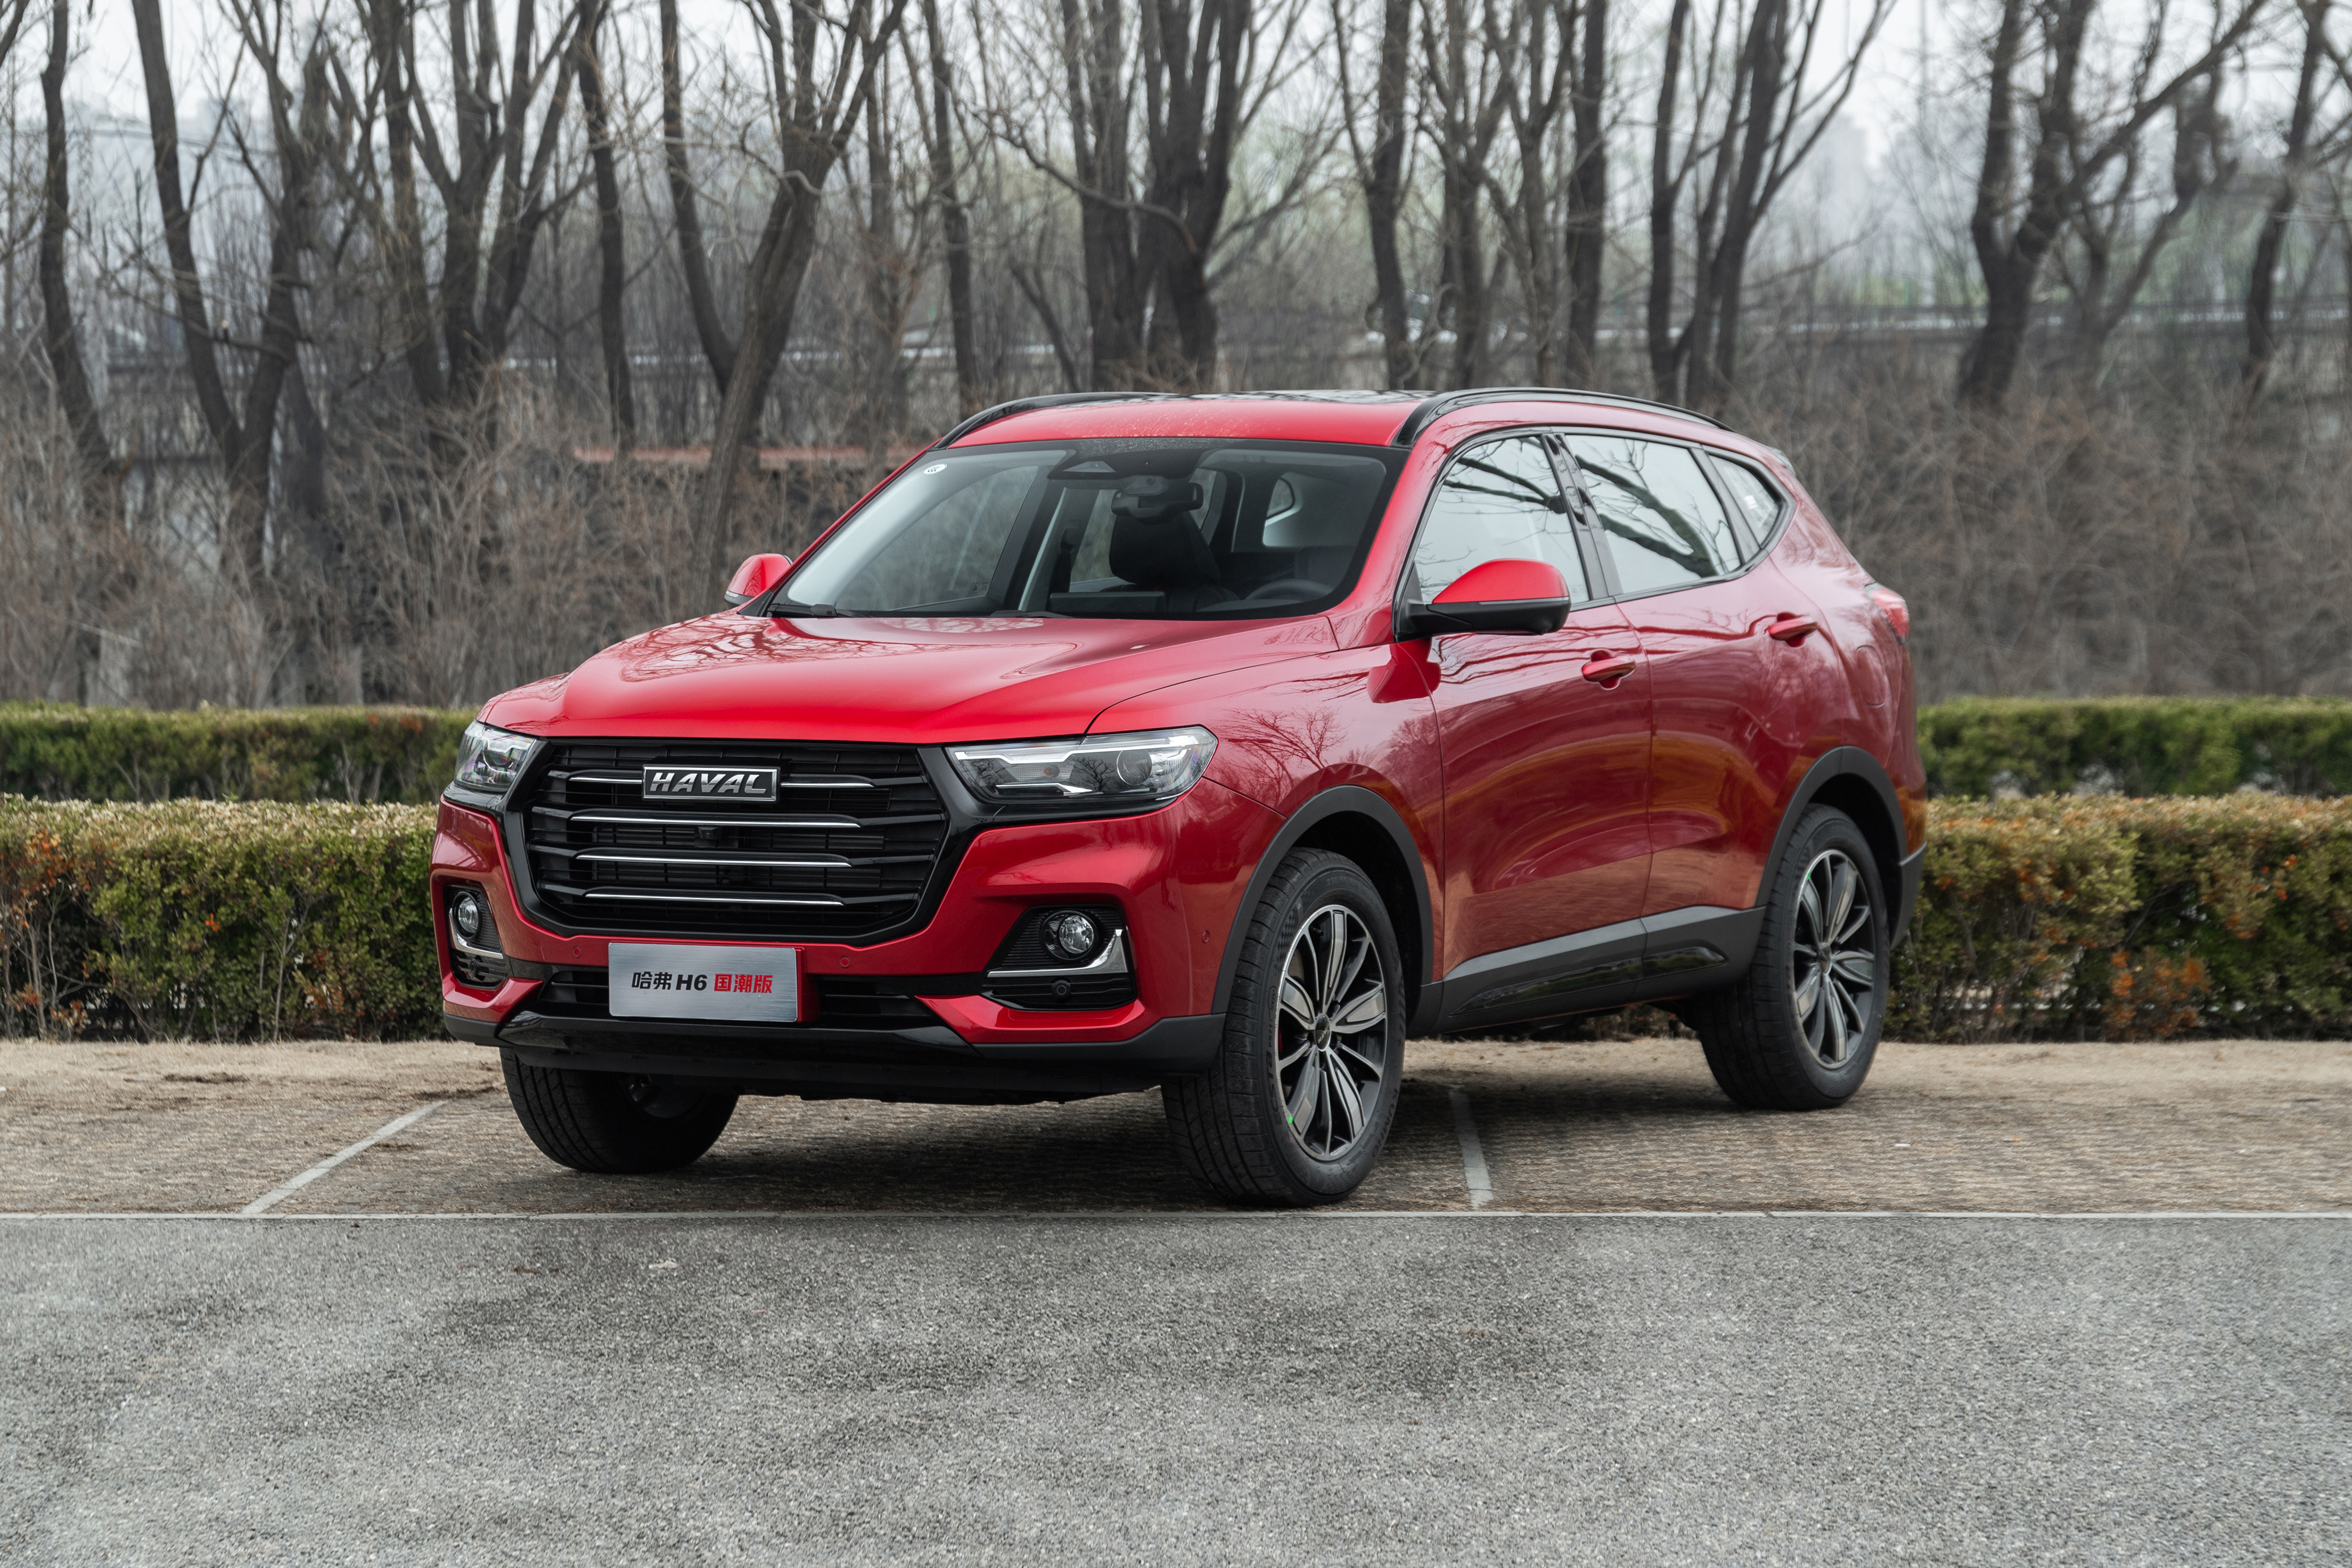 Wallpapers cars haval chinese on the desktop